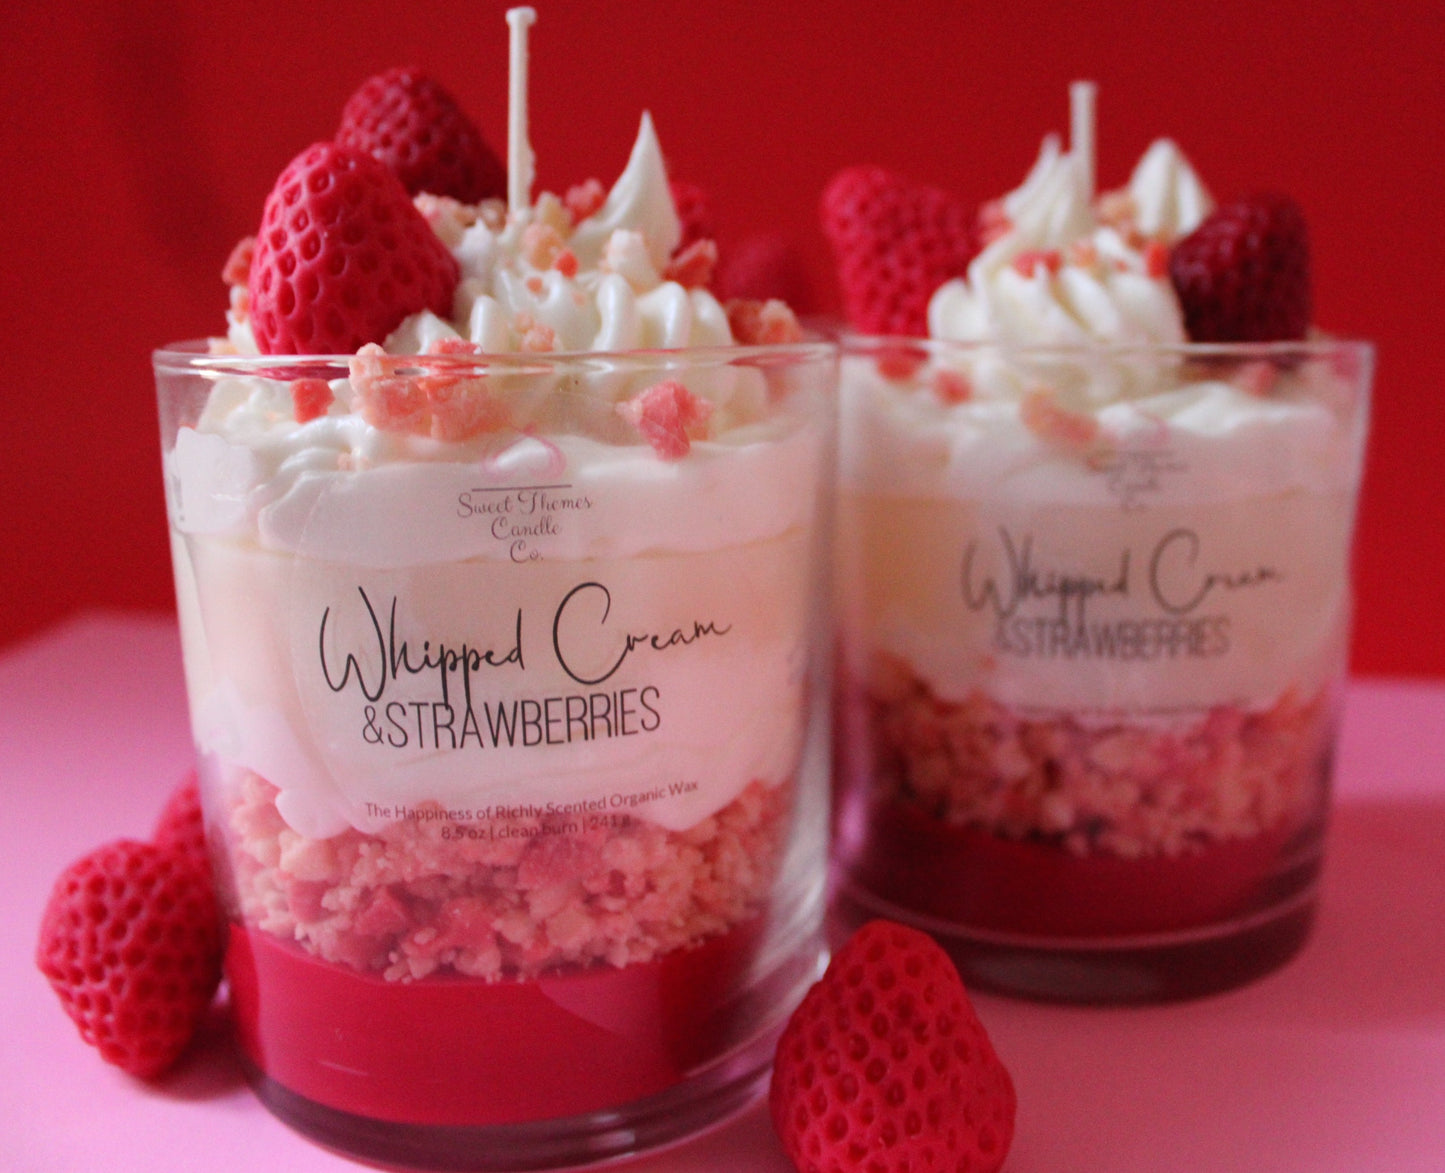 Strawberries and Whipped Cream Parfait